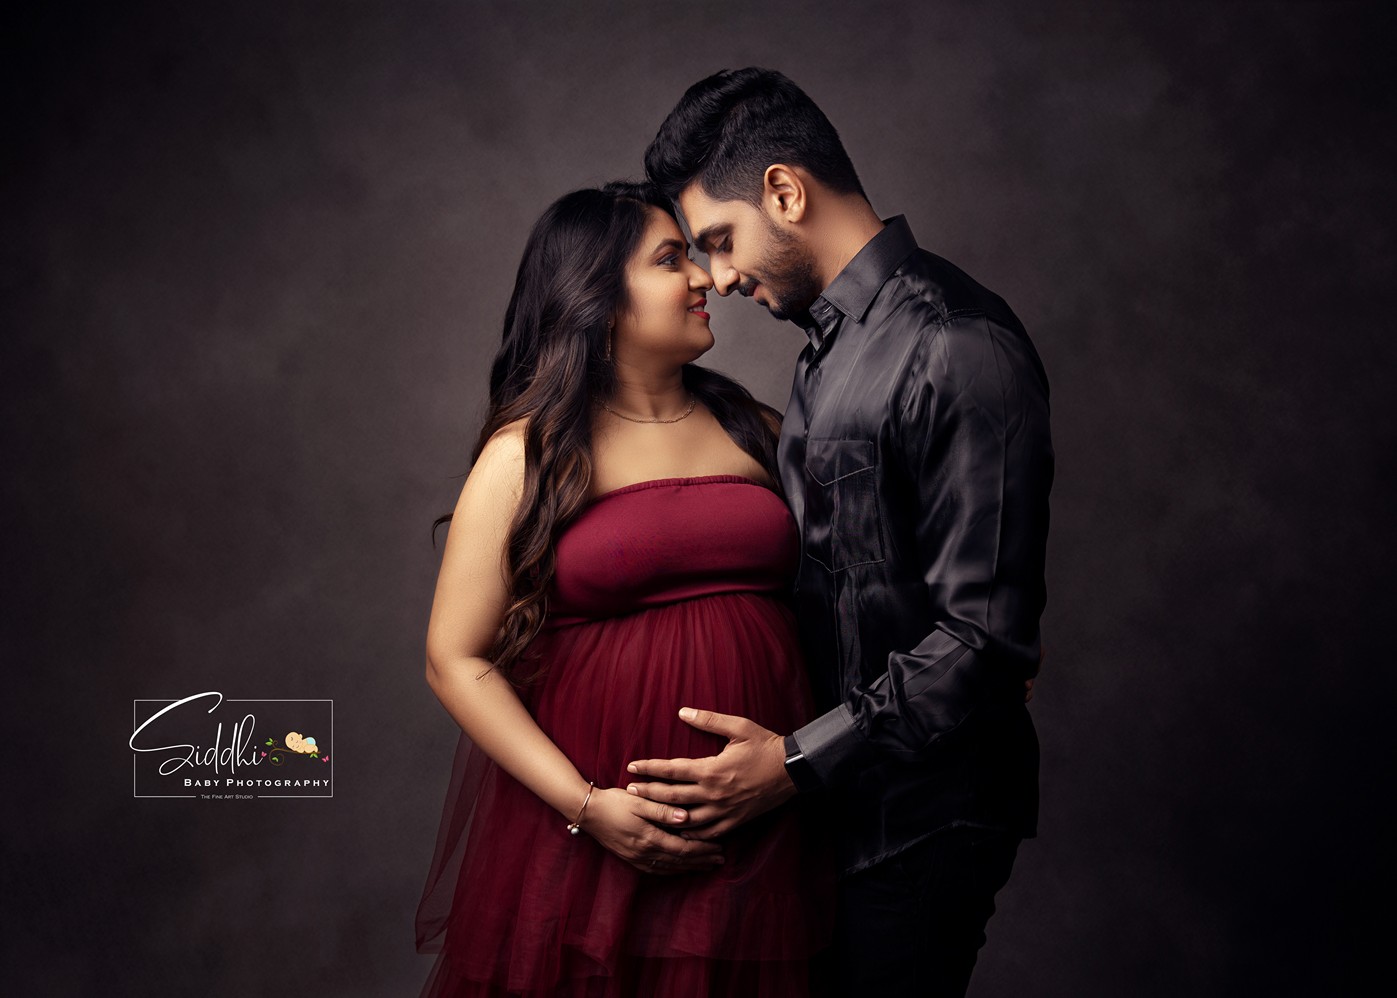 Maternity pictures: Ideas for your maternity photoshoot | BabyCenter